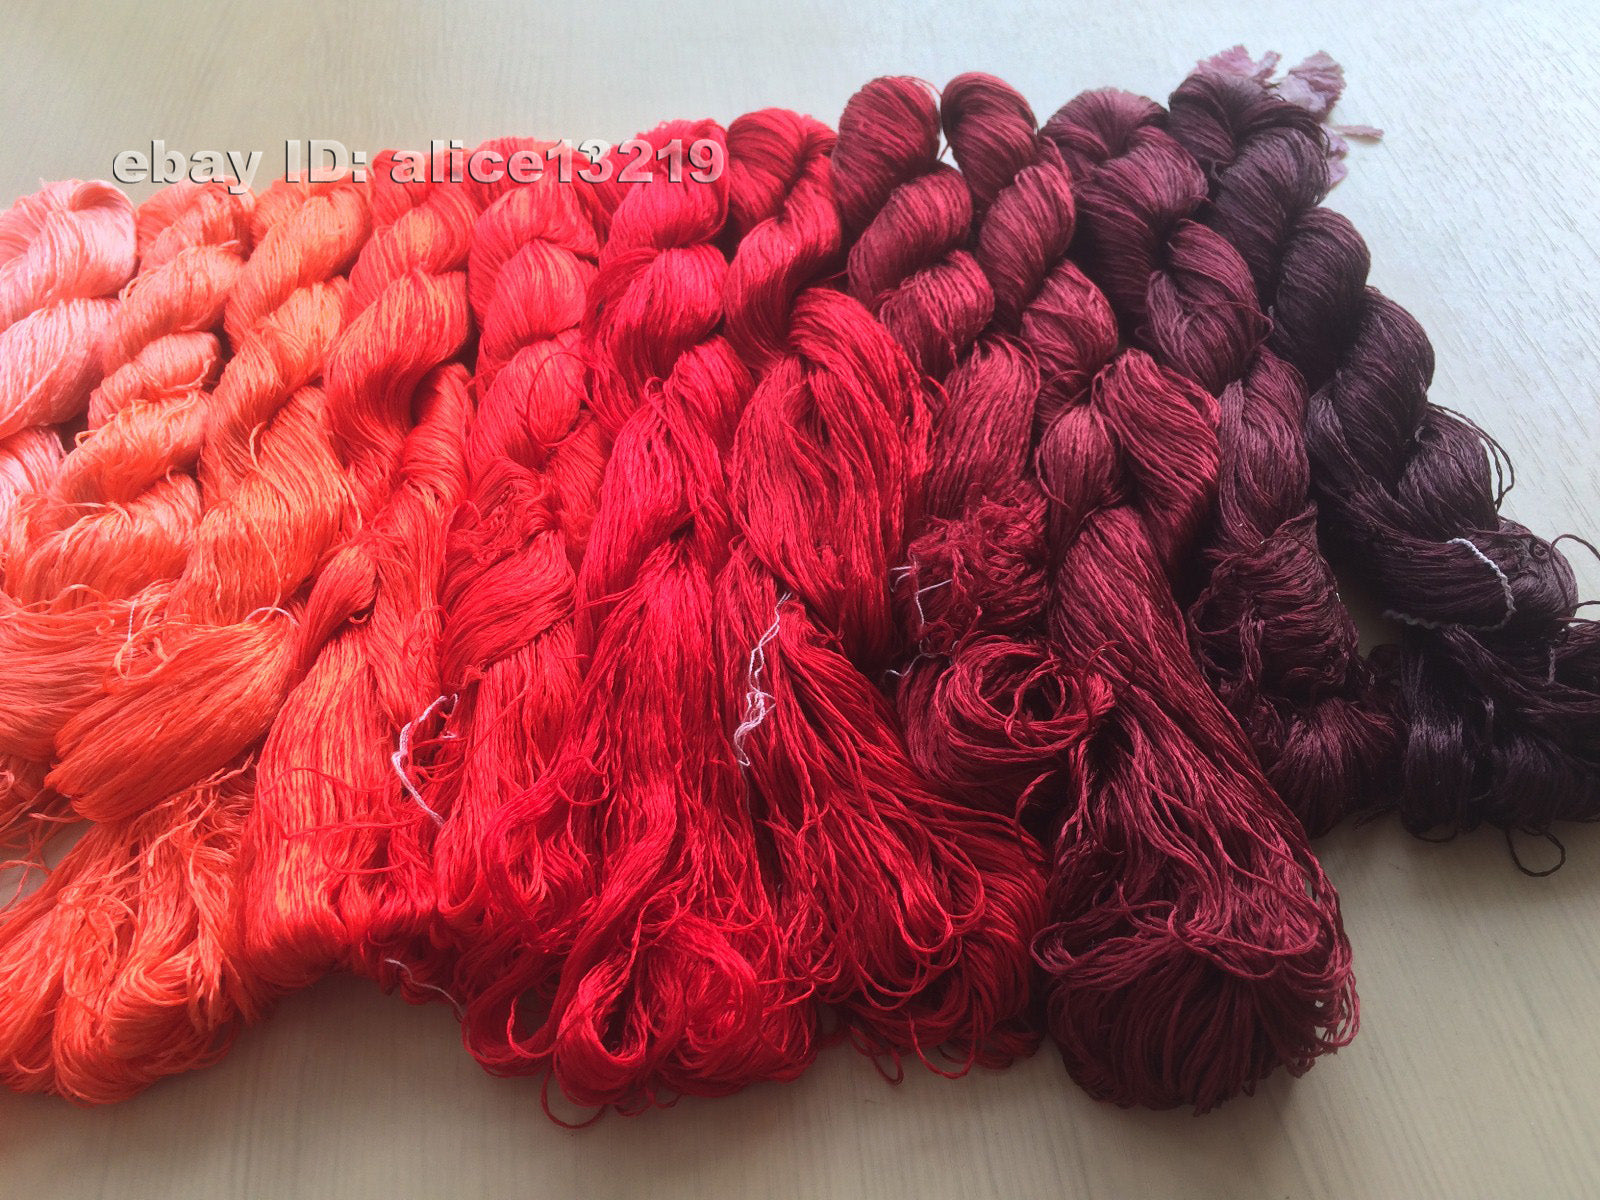 13bundle 100%real mulberry silk,hand-dyed embroidery silk floss/thread N3